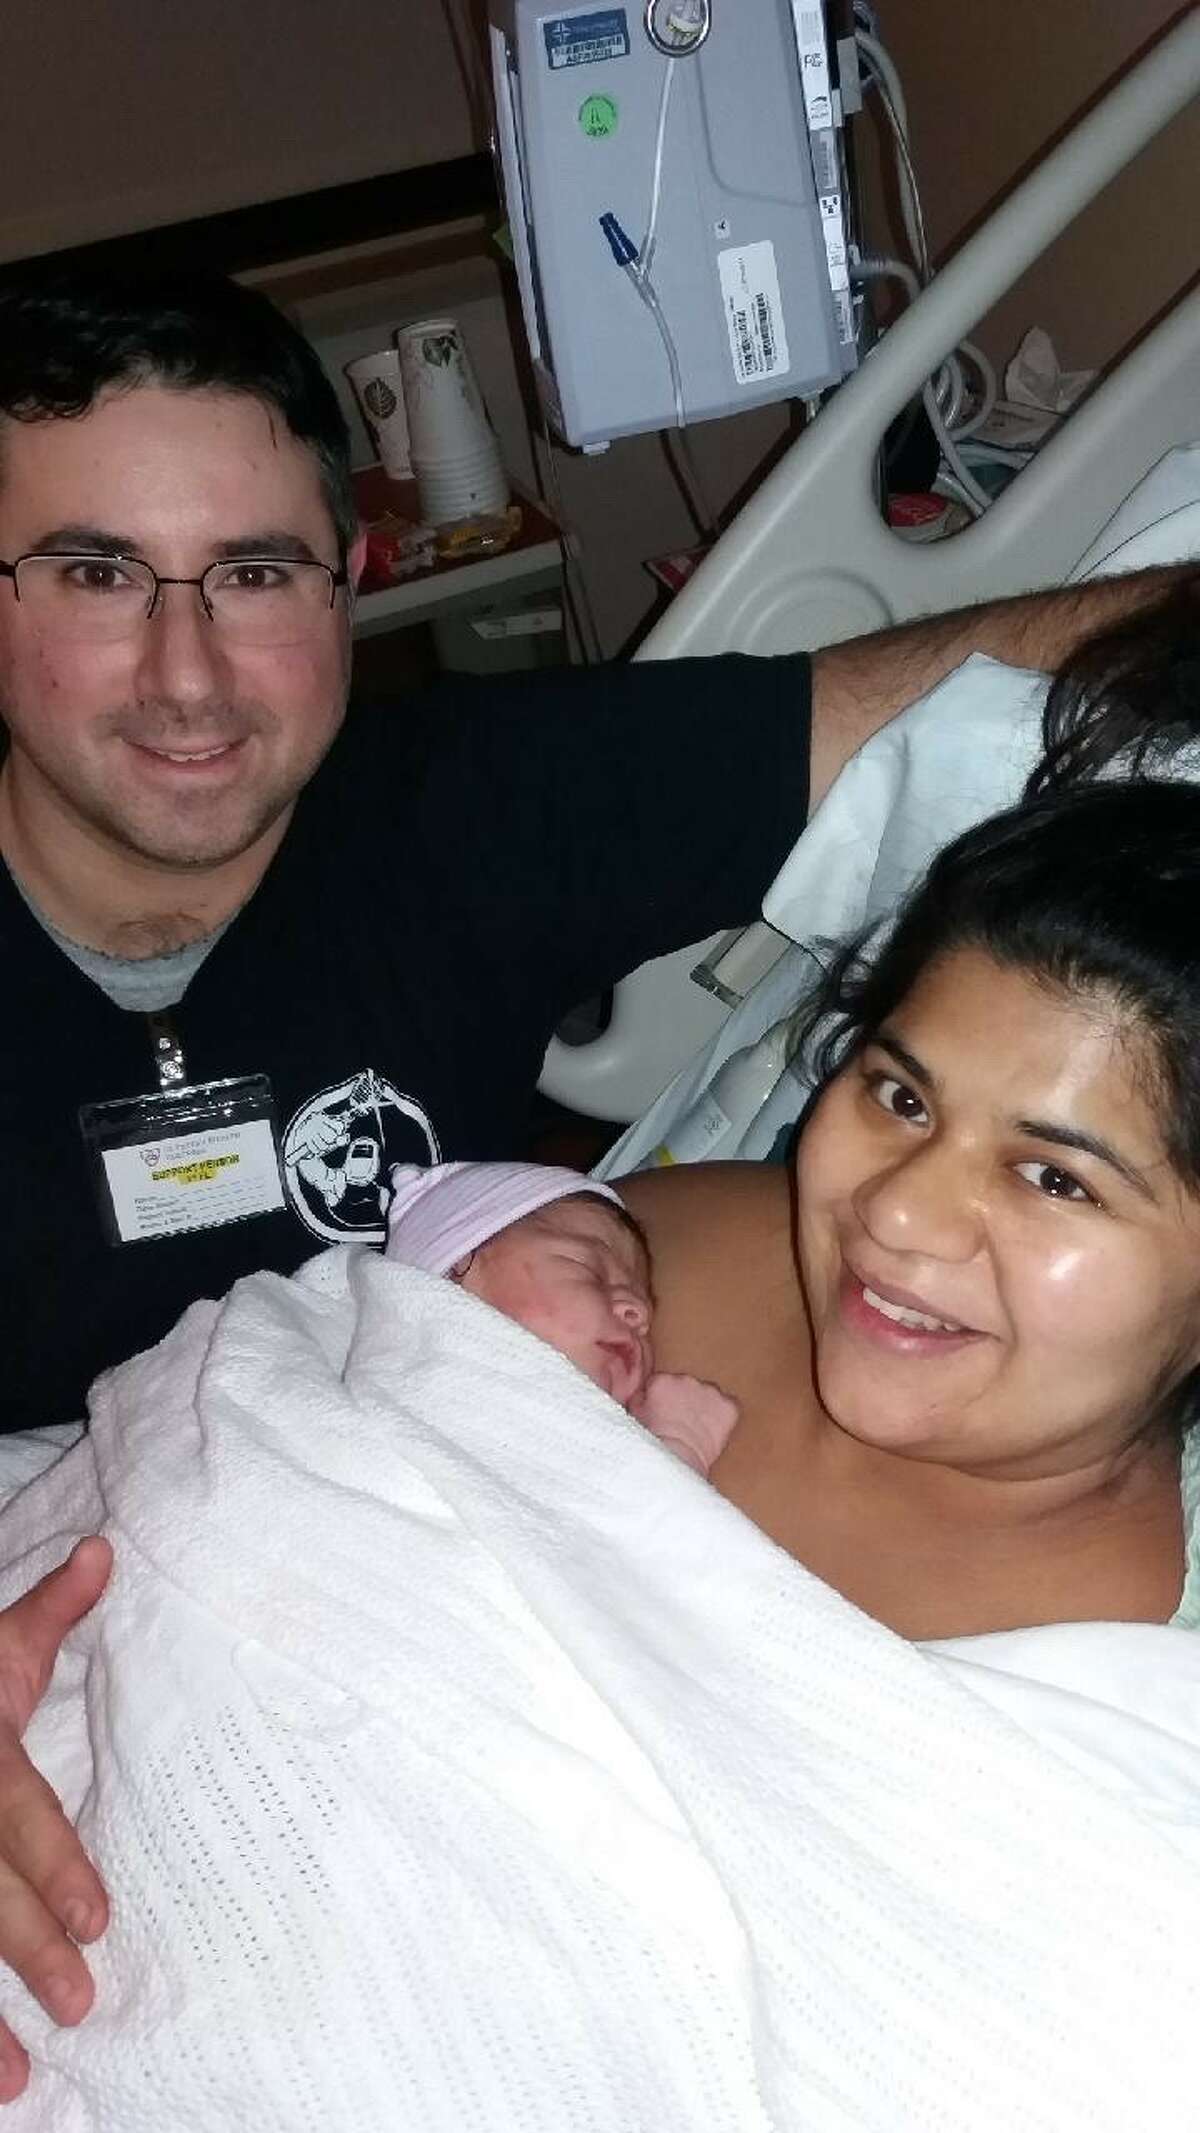 At St. Peter's, a girl was born to Angela and Anthony Chrisomalis of West Coxsackie at 3:07 p.m. Feb. 29, 2020, weighing seven pounds and 7.6 ounces.